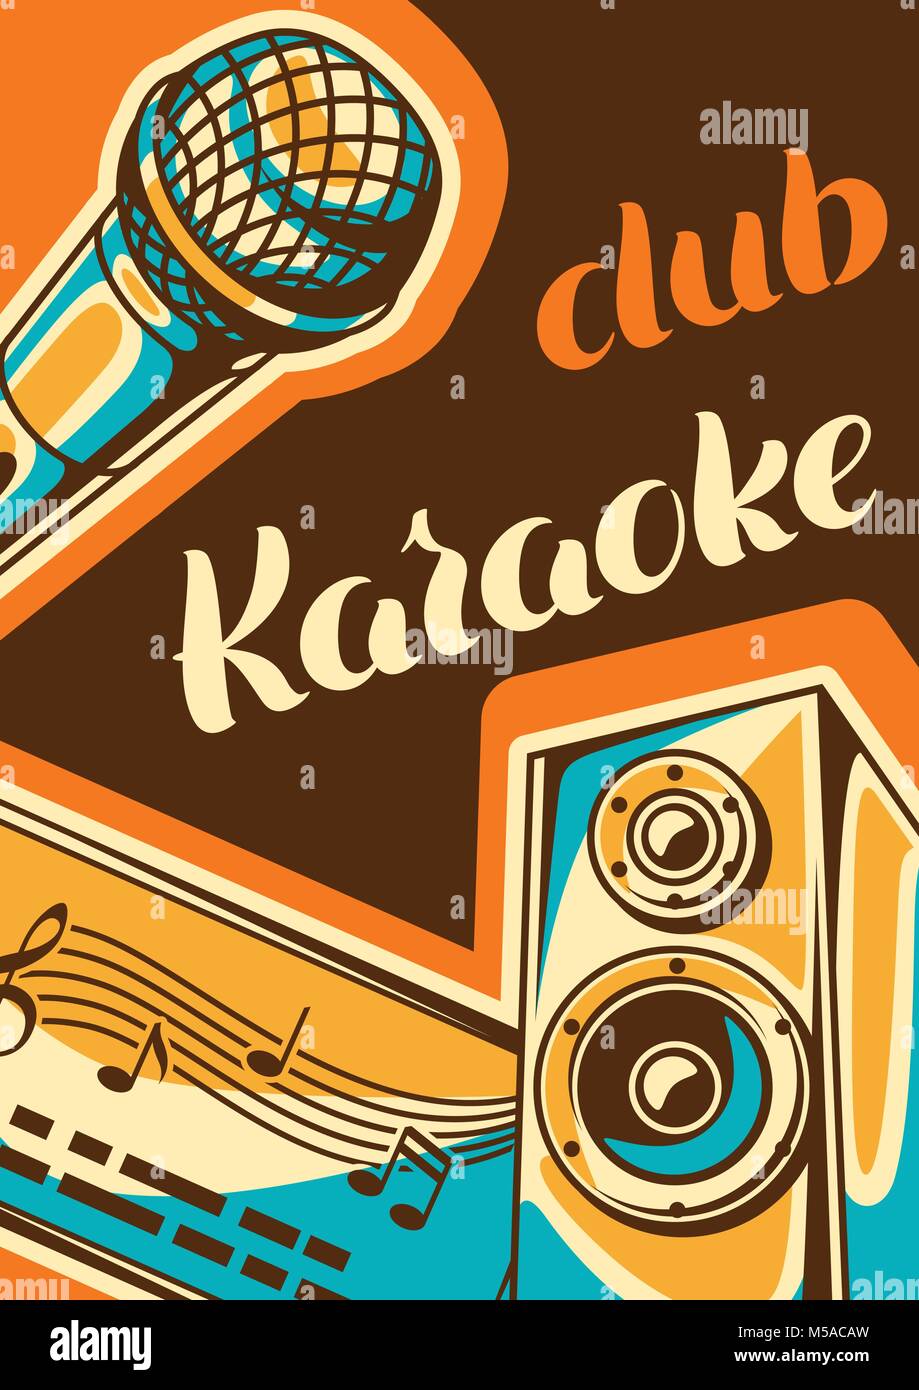 Karaoke Club Poster Music Event Banner Illustration With Microphone